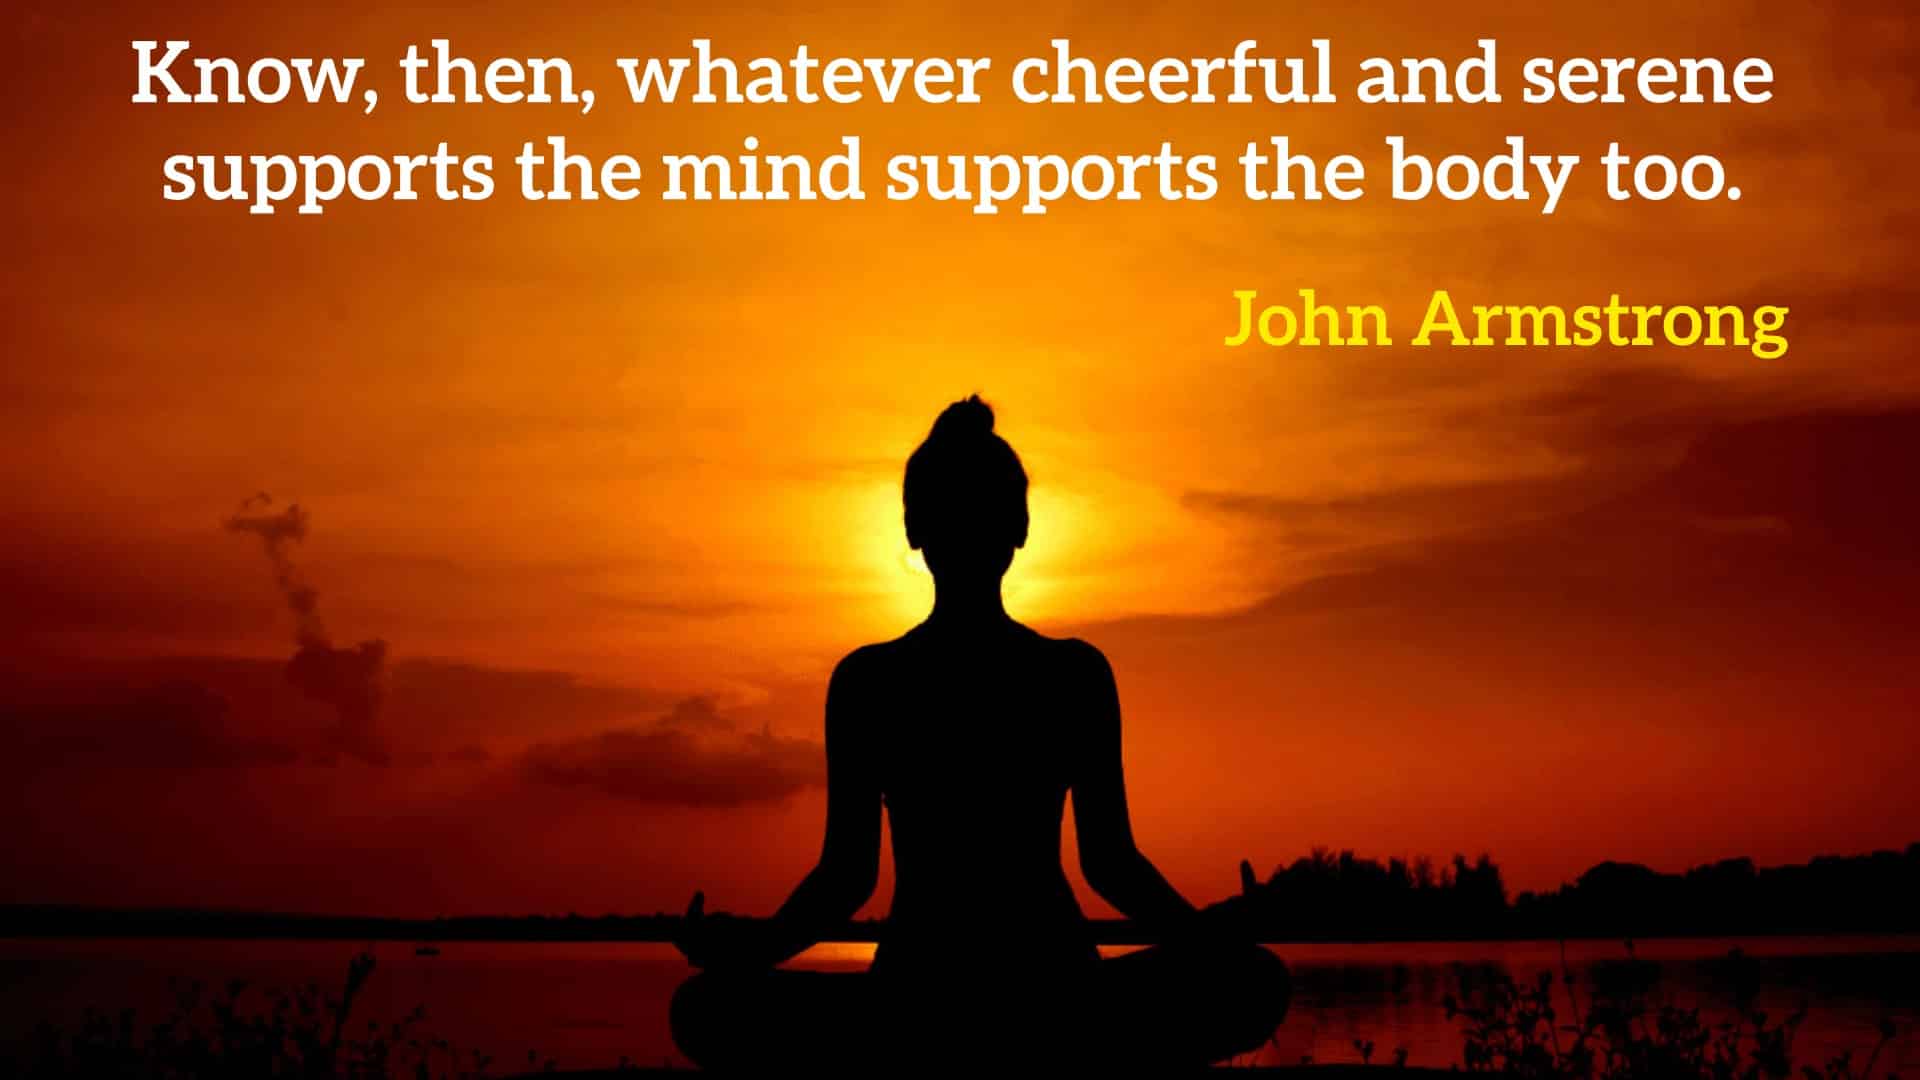 Know, then, whatever cheerful and serene supports the mind supports the body too.” - John Armstrong